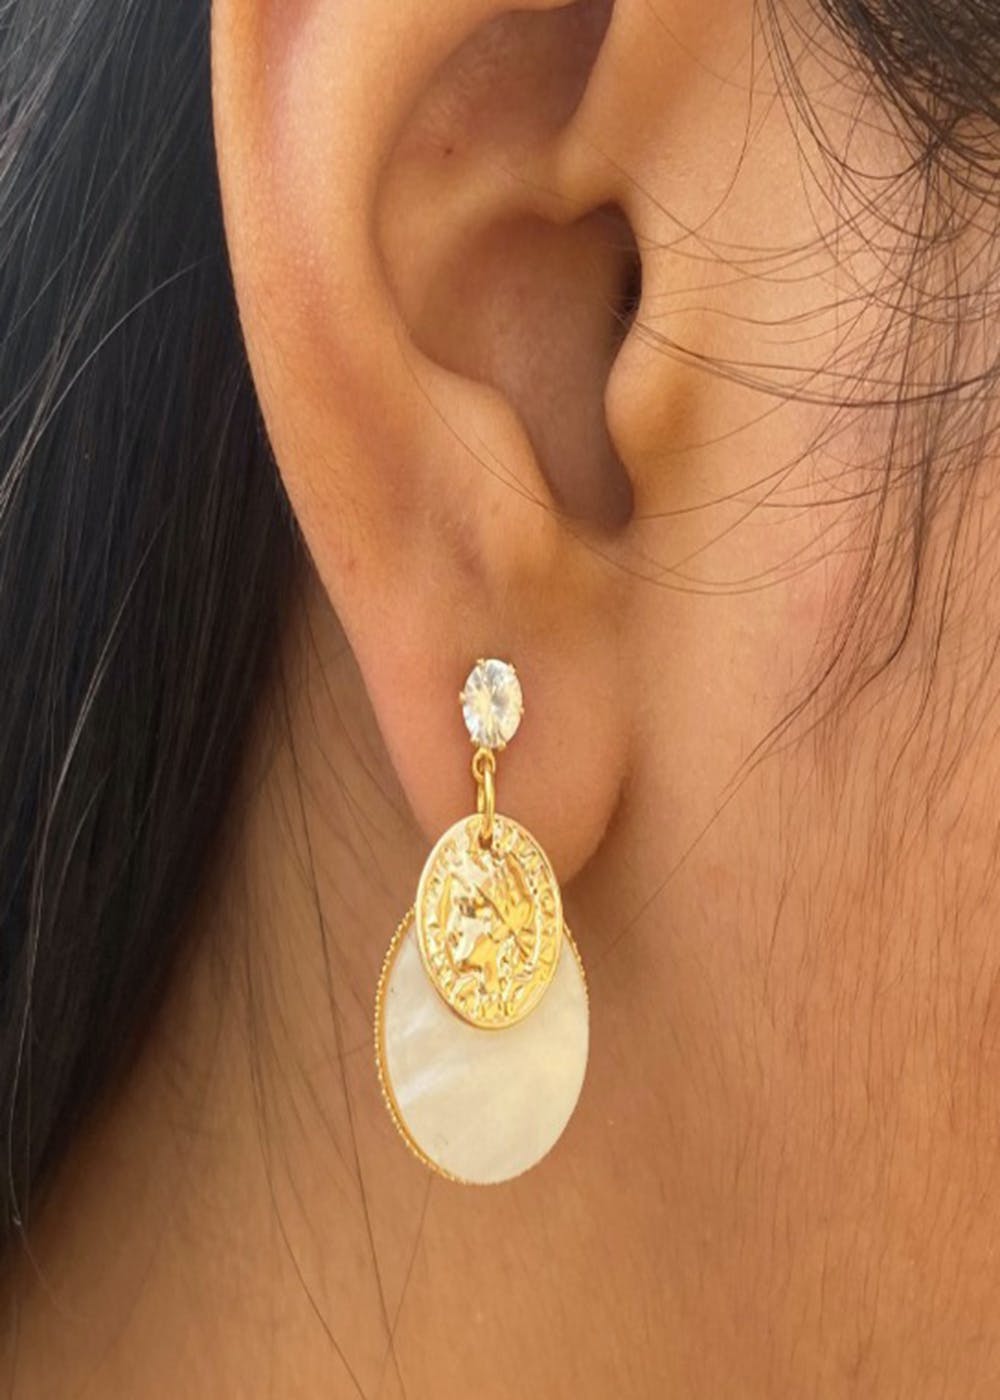 Sterling Silver with 14 Karat Yellow Gold Plating Emperor Coin Hoop Earrings  | Bluestone Jewelry | Lake Tahoe Shopping